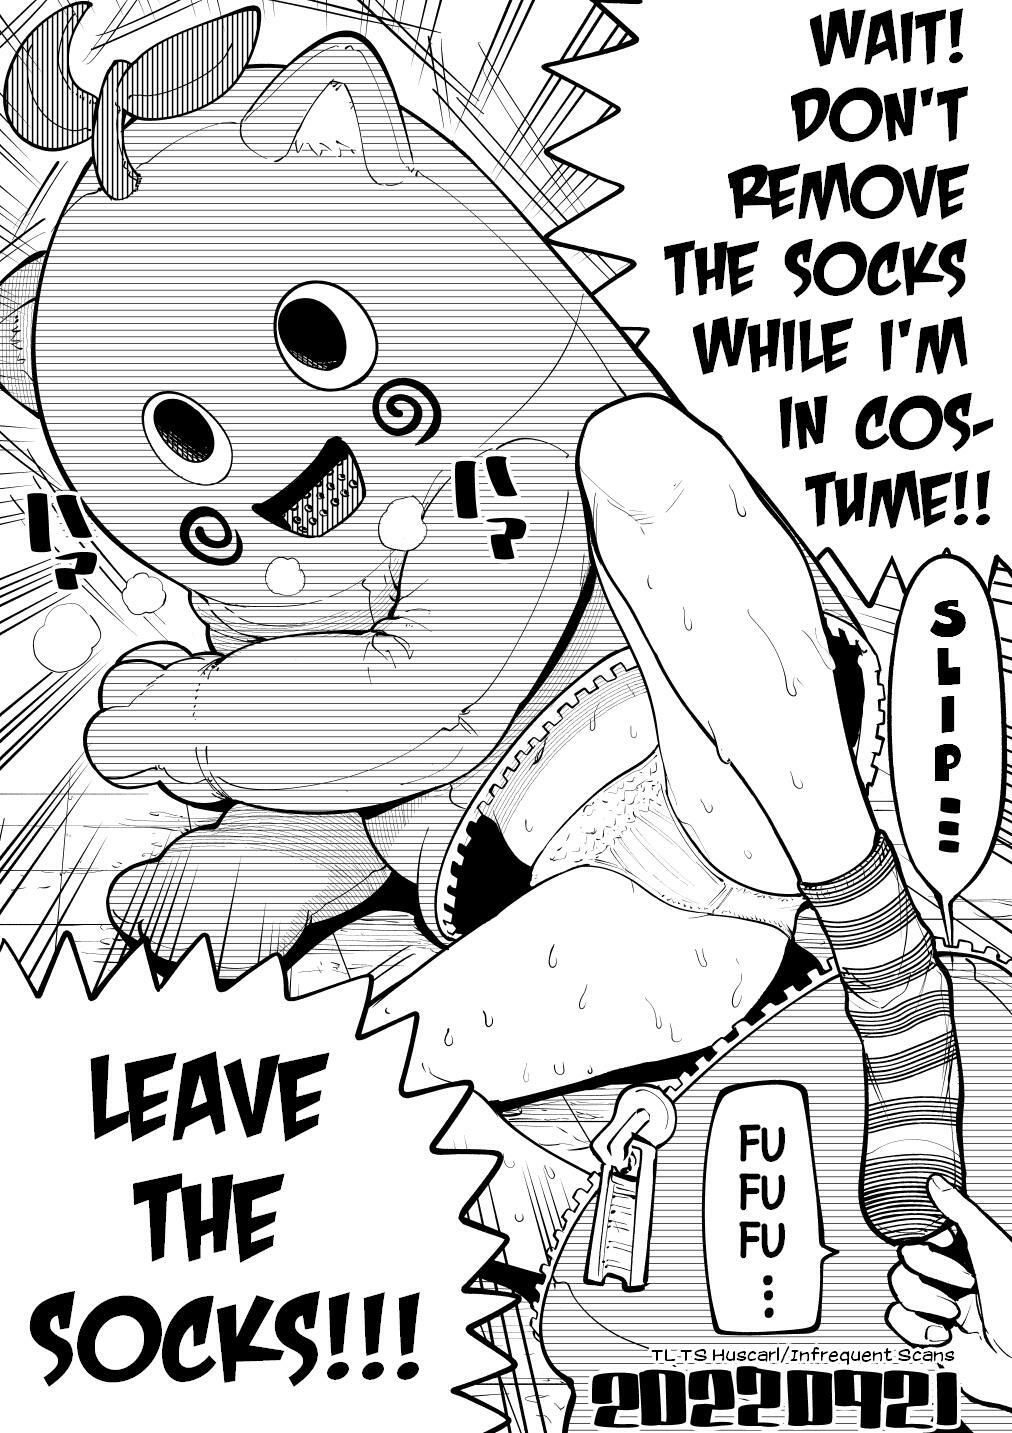 Read Today's Doodle Chapter 109: Tanuki Wants You To Remove Some